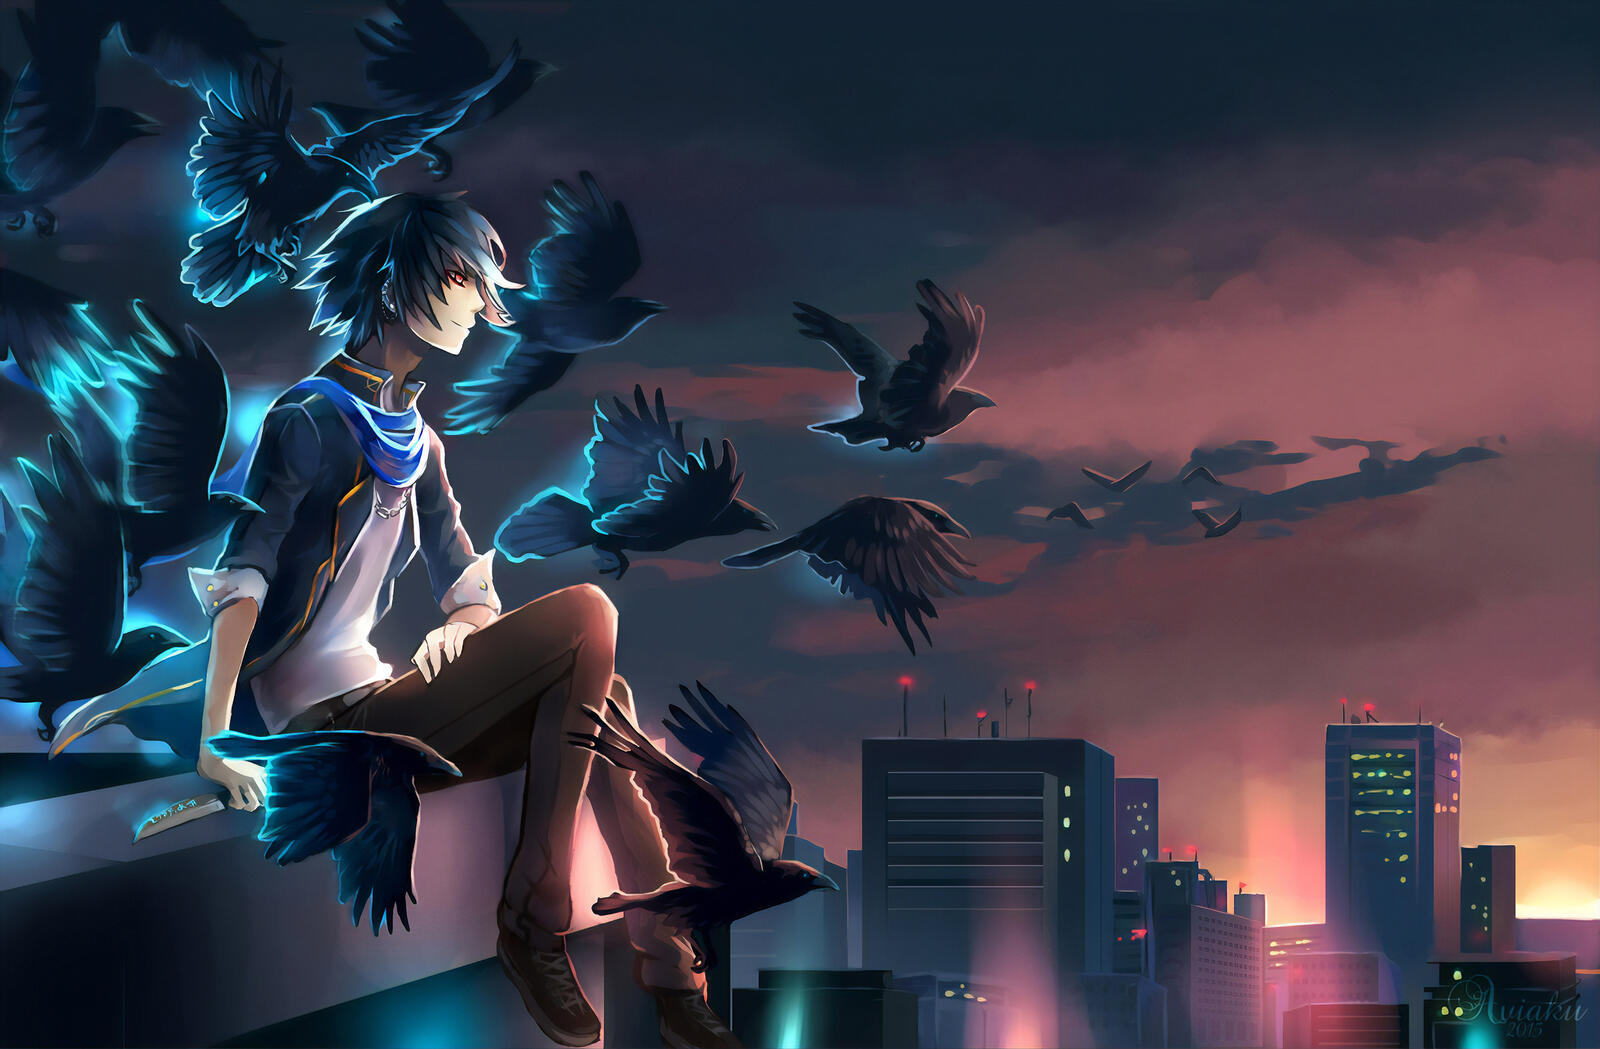 Free photo The boy from the anime is sitting on the roof with the crows